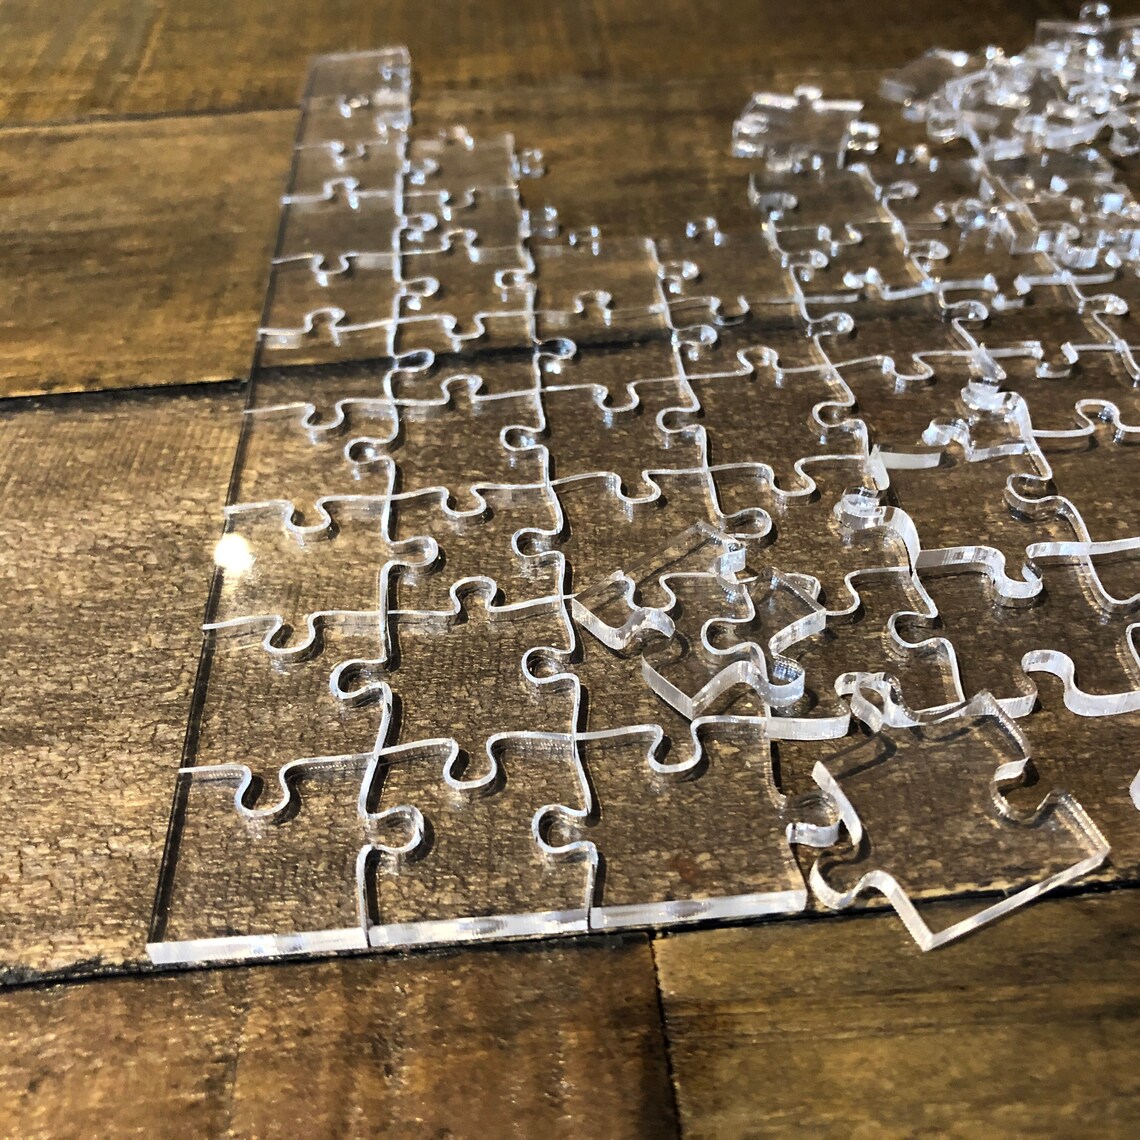 The Impossible Isolation Jigsaw Puzzle Drive Yourself or - Etsy